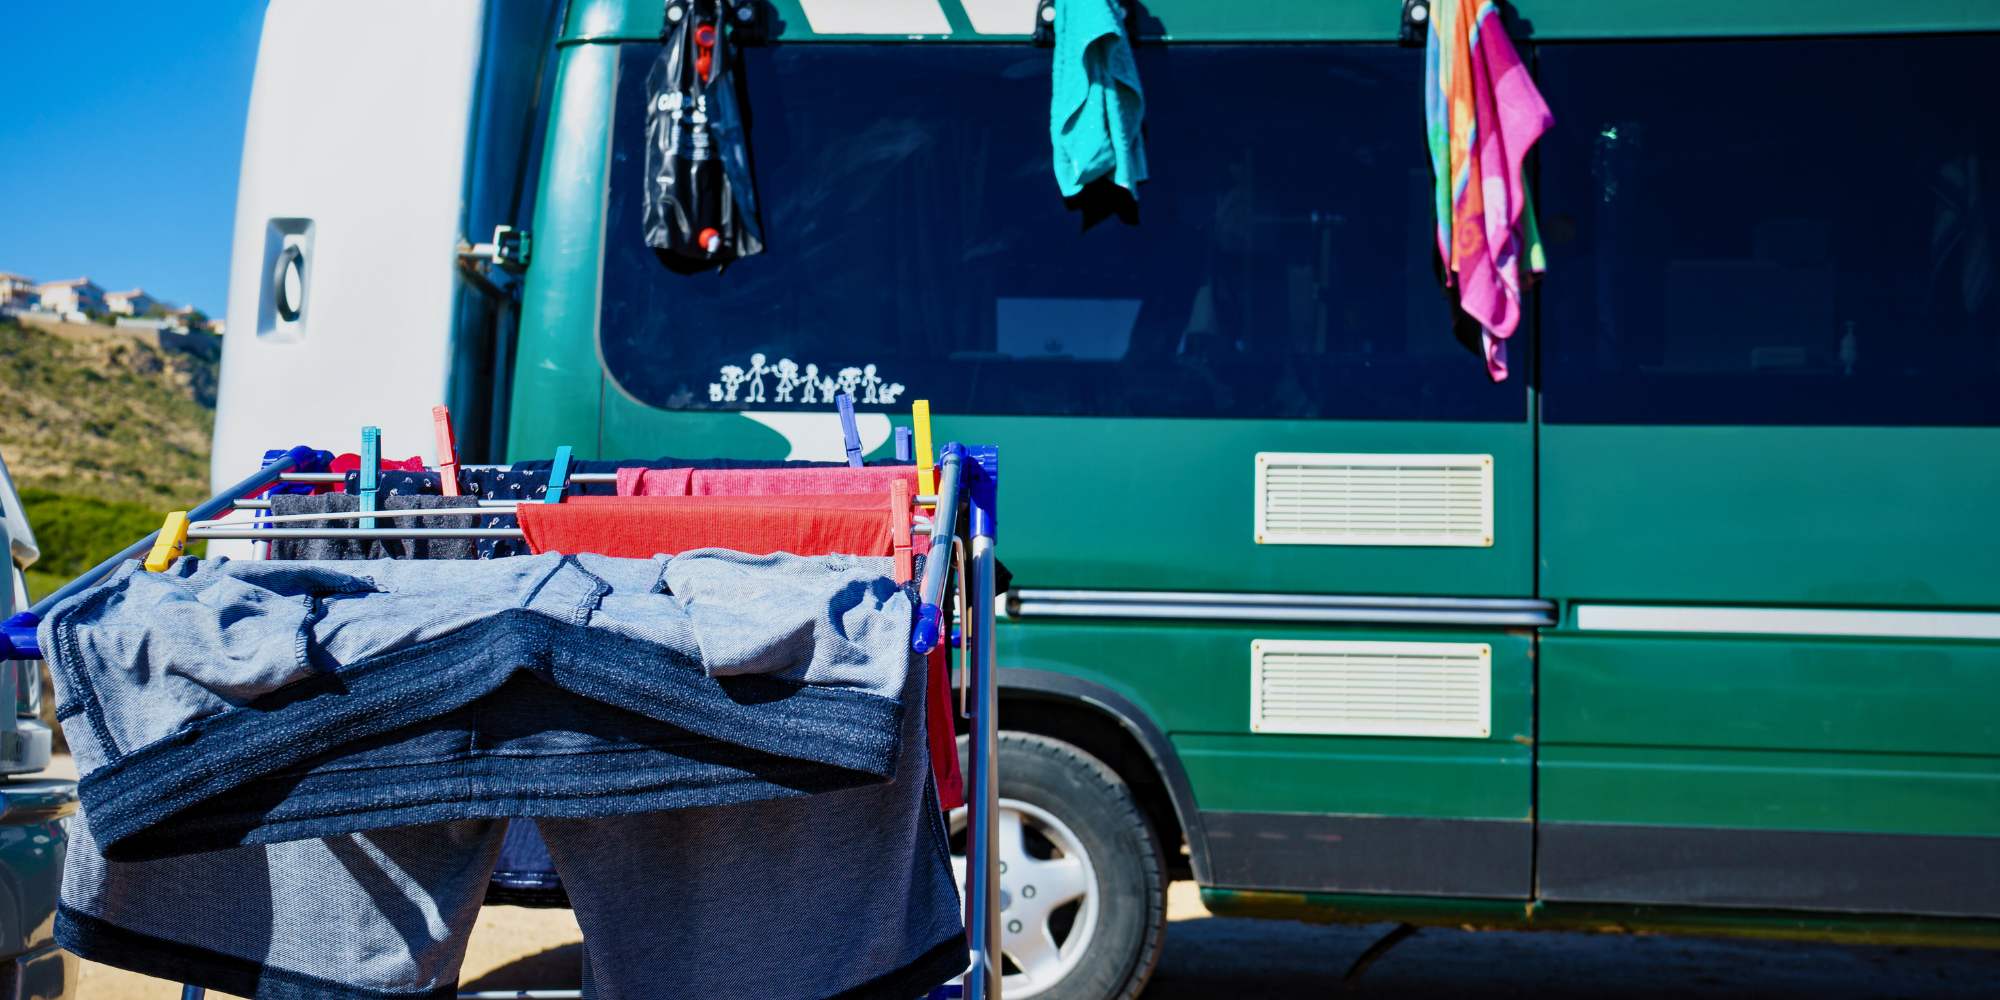 This Wash Bag Makes Cleaning Your Clothes While Camping As Easy As